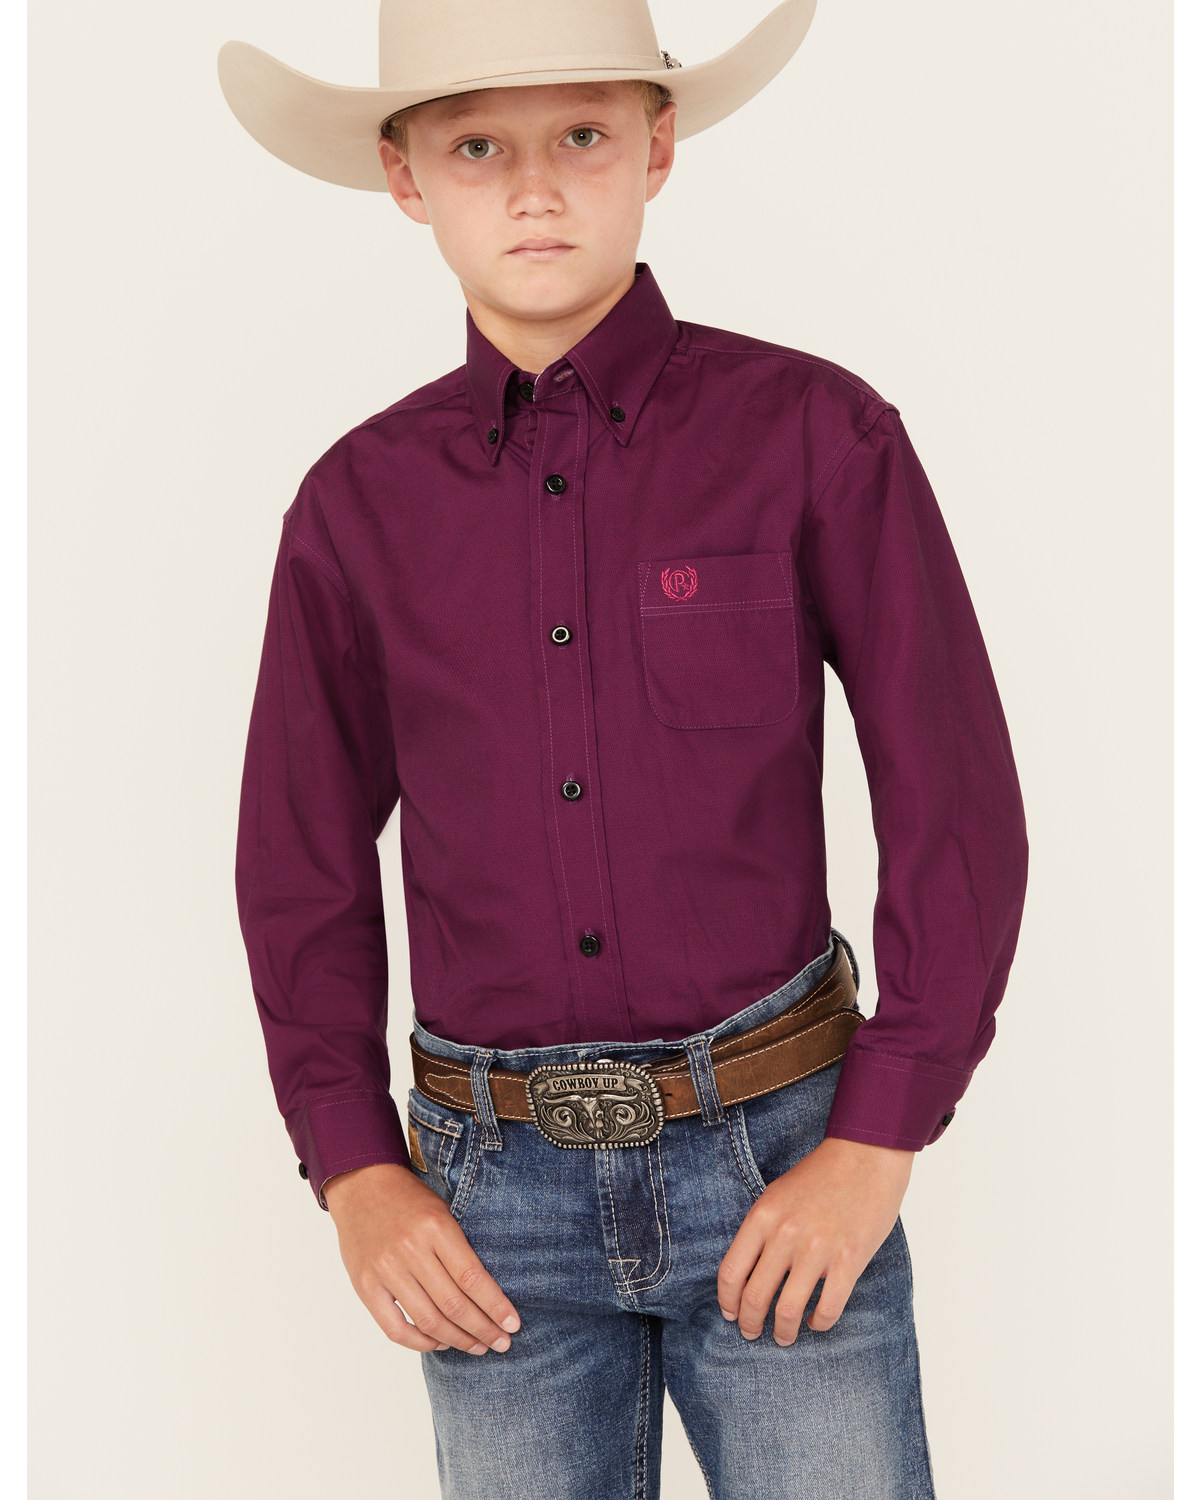 Panhandle Boys' Solid Long Sleeve Button Down Shirt